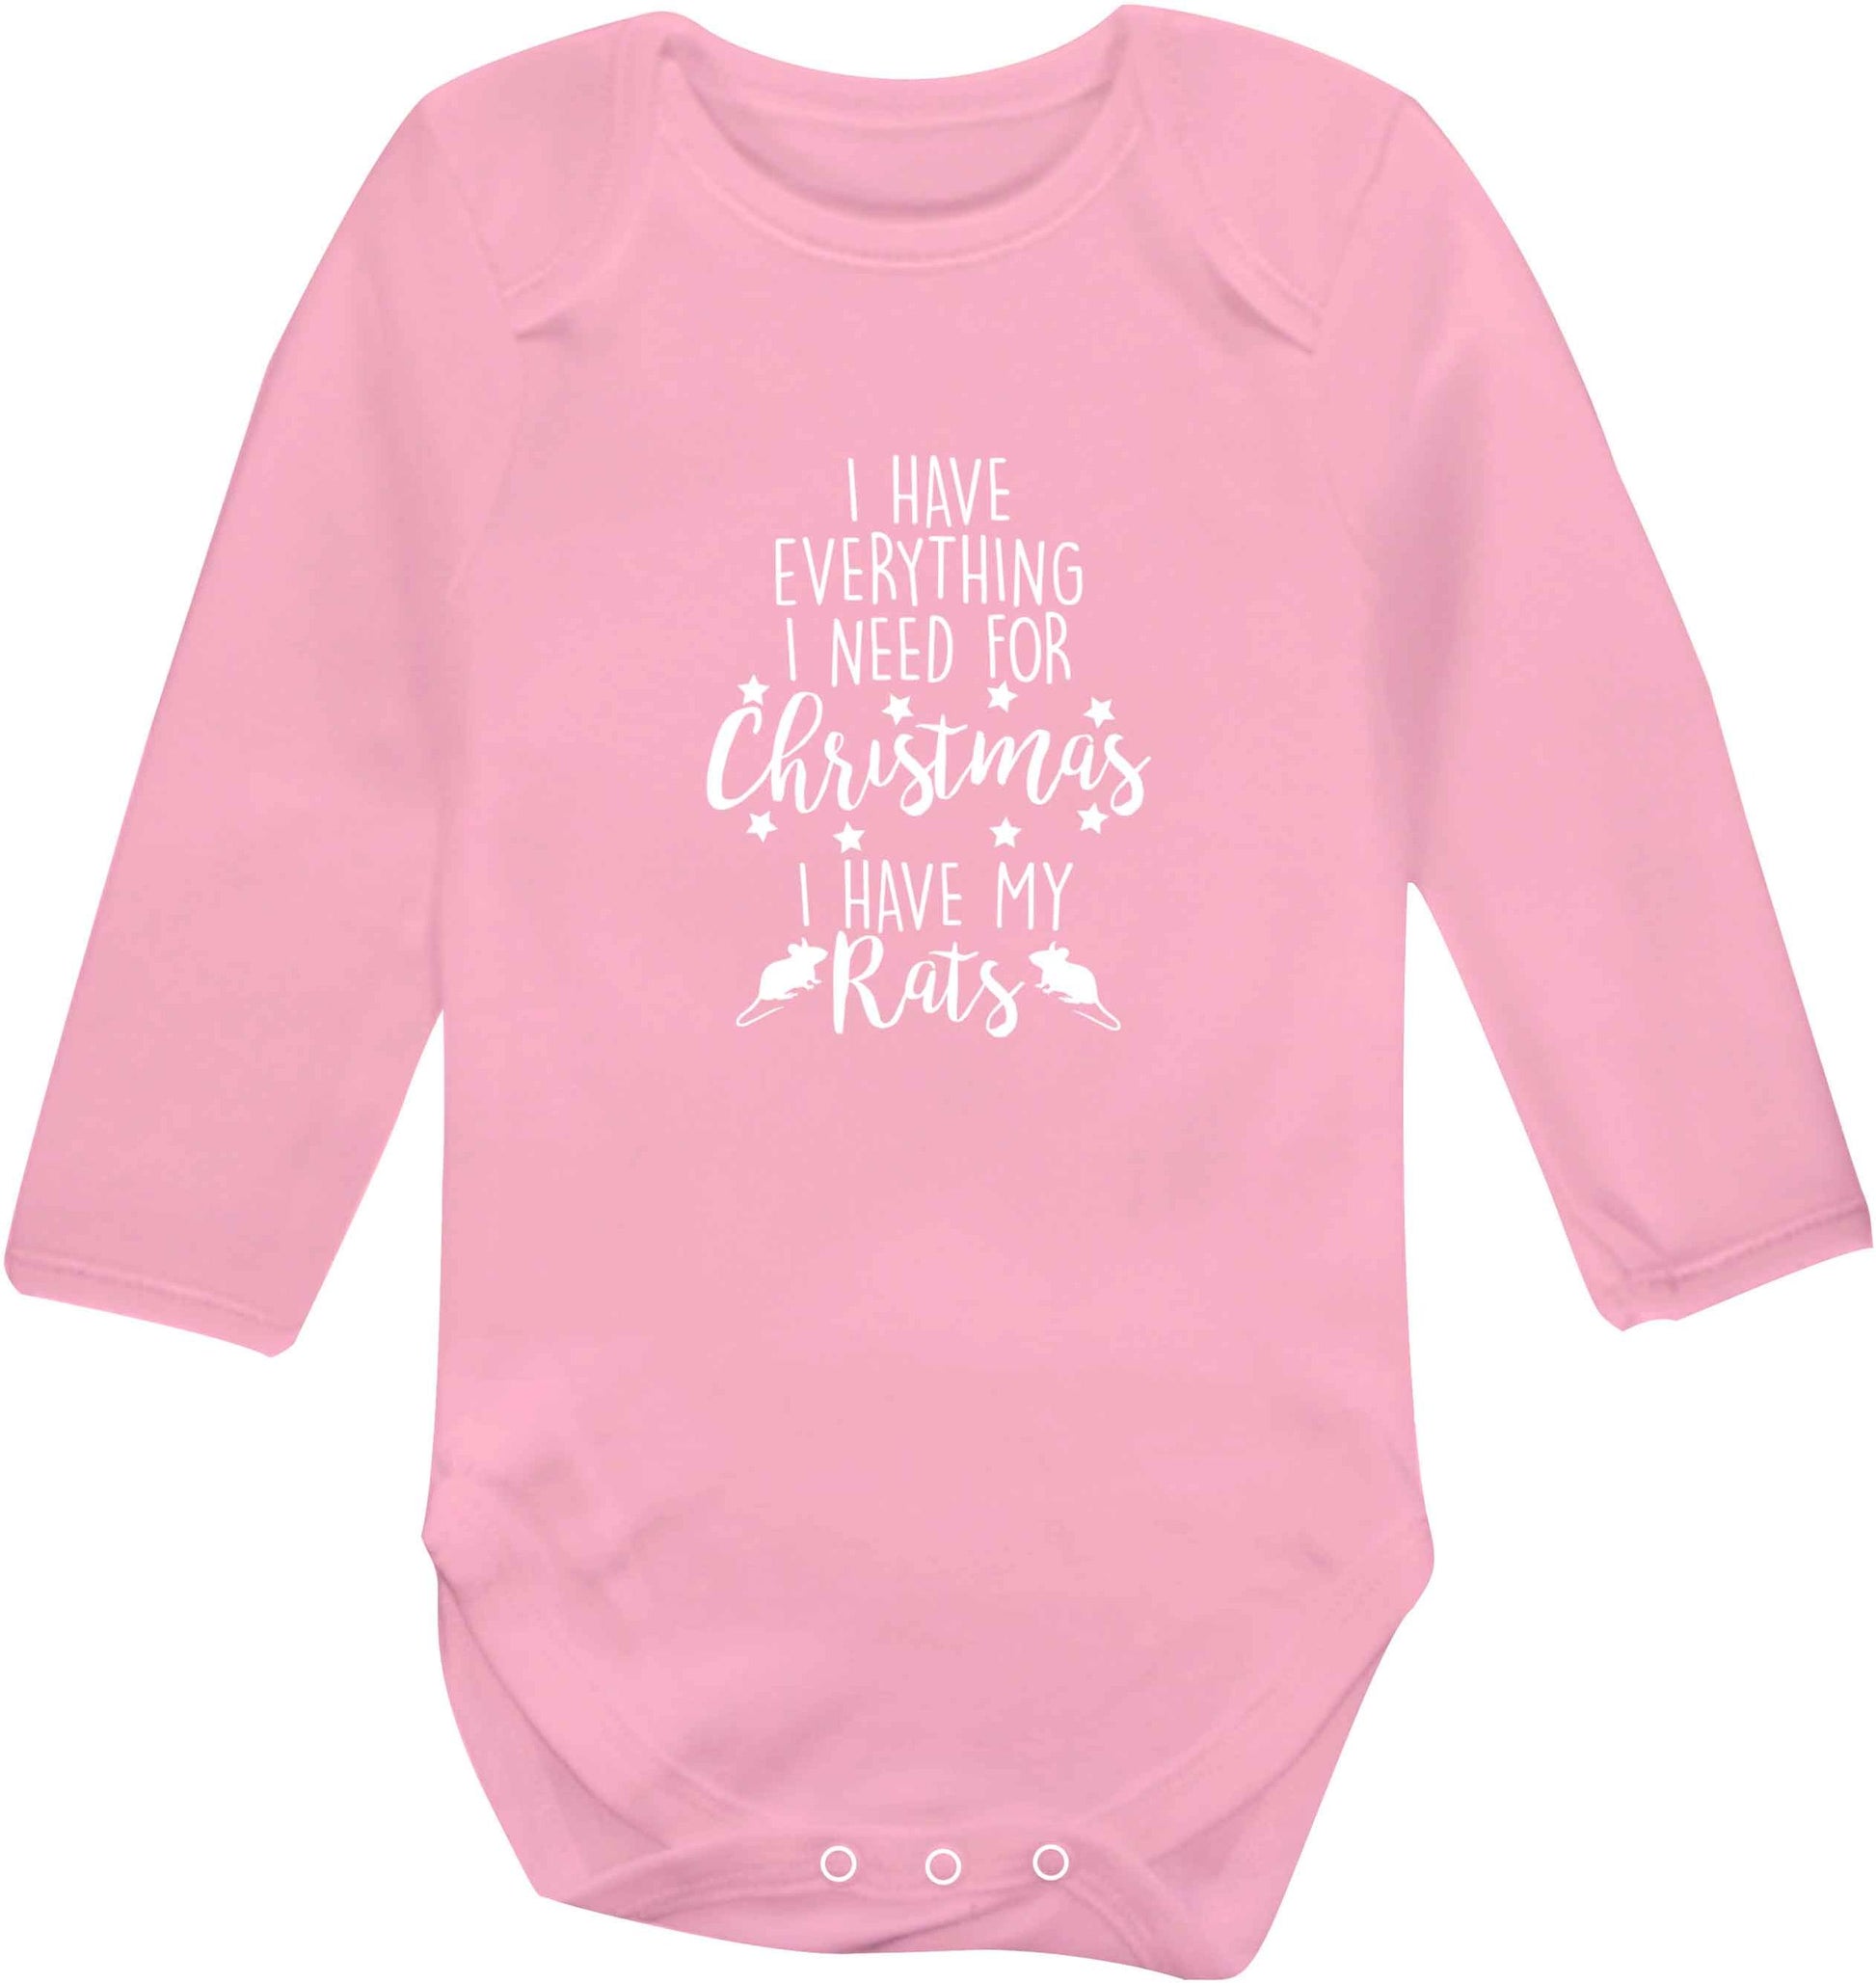 I have everything I need for Christmas I have my rats baby vest long sleeved pale pink 6-12 months